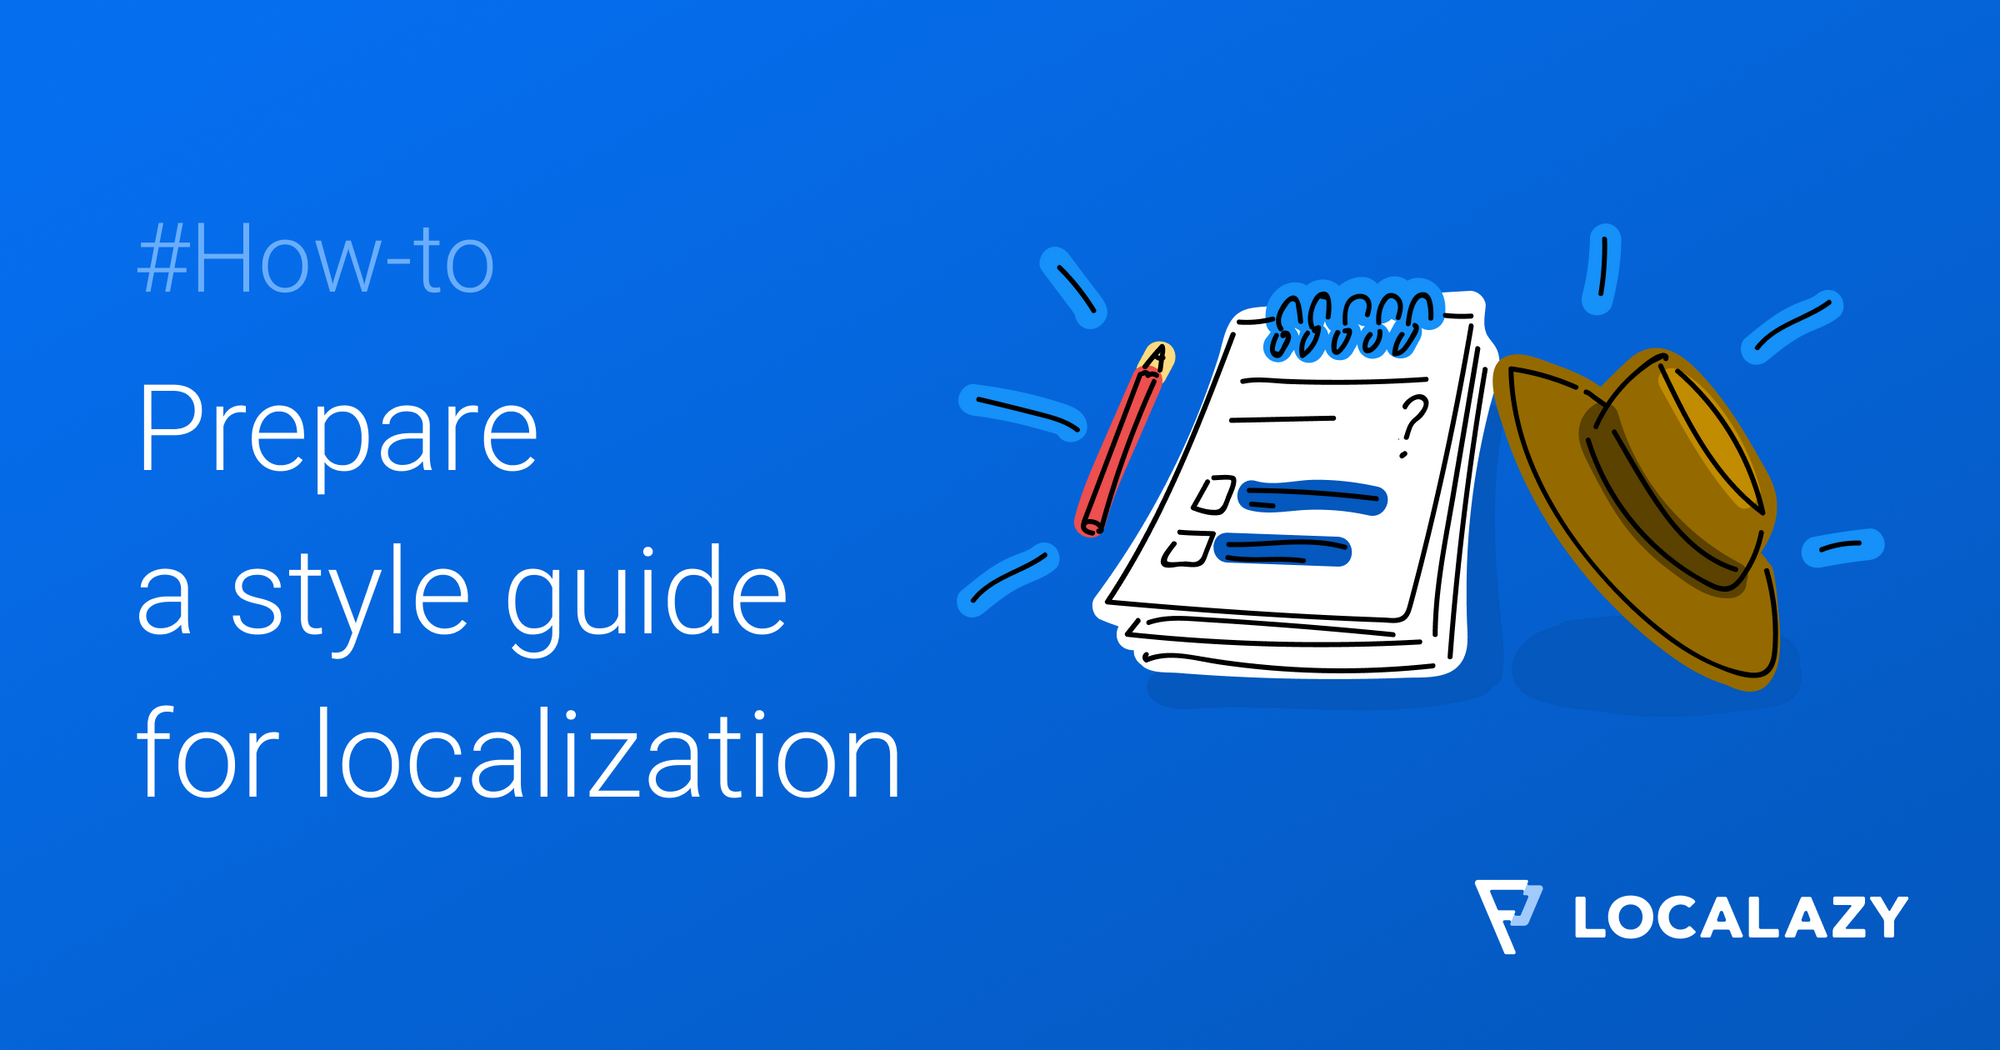 Guide your style - linguistic style guides in software localization